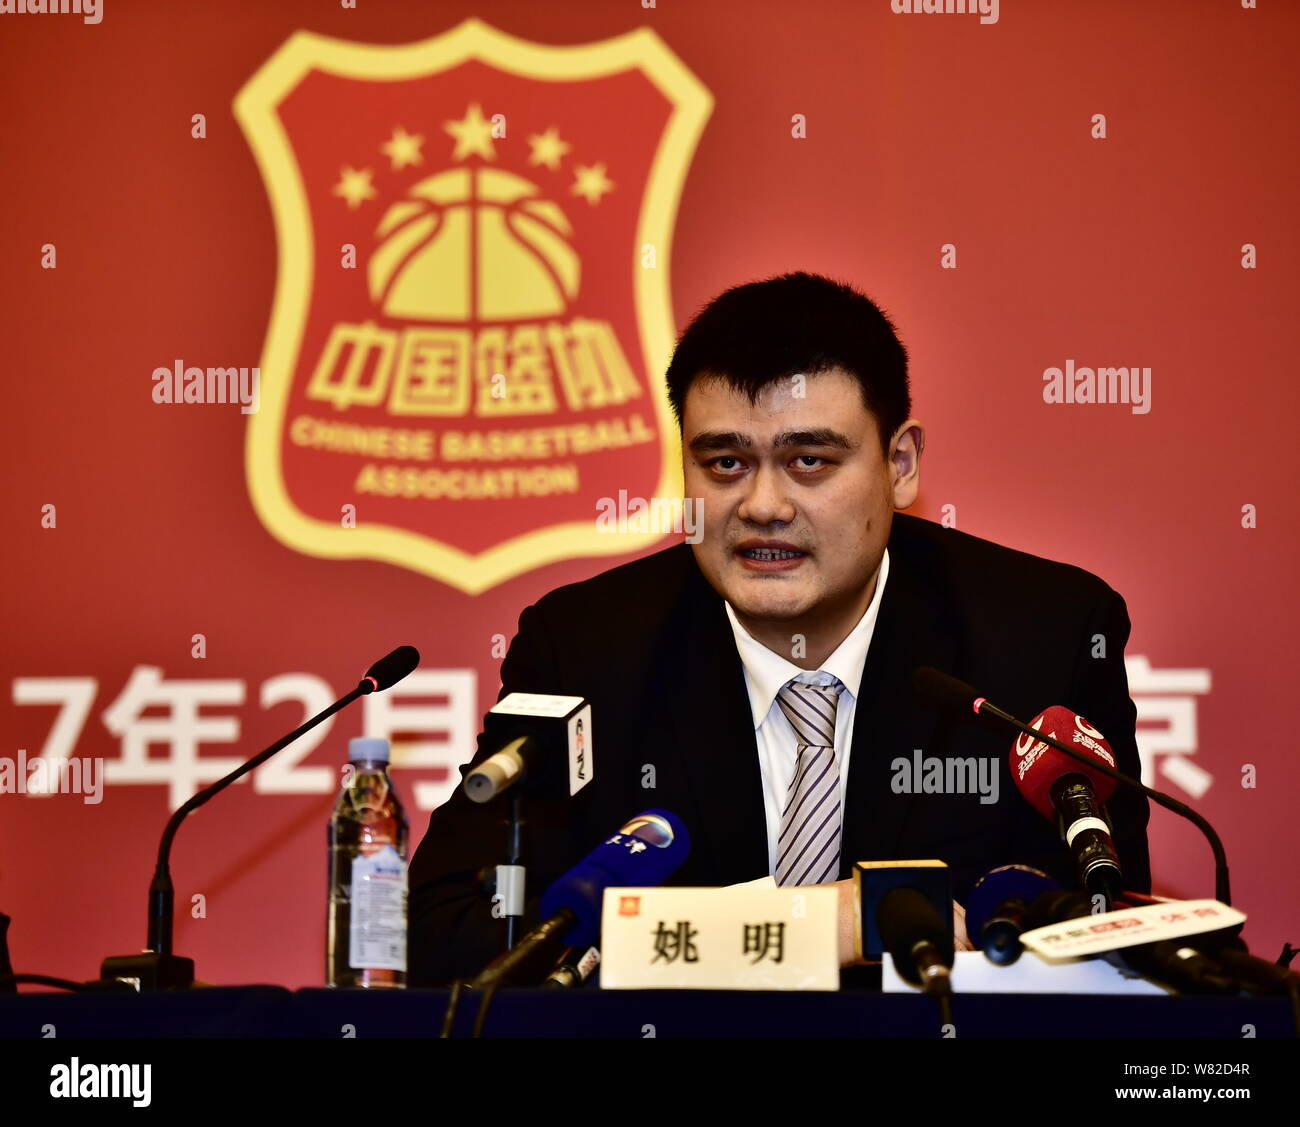 Retired Chinese basketball star Yao Ming, new chairman of the Chinese Basketball Association, speaks during the 9th National Congress of Chinese Baske Stock Photo